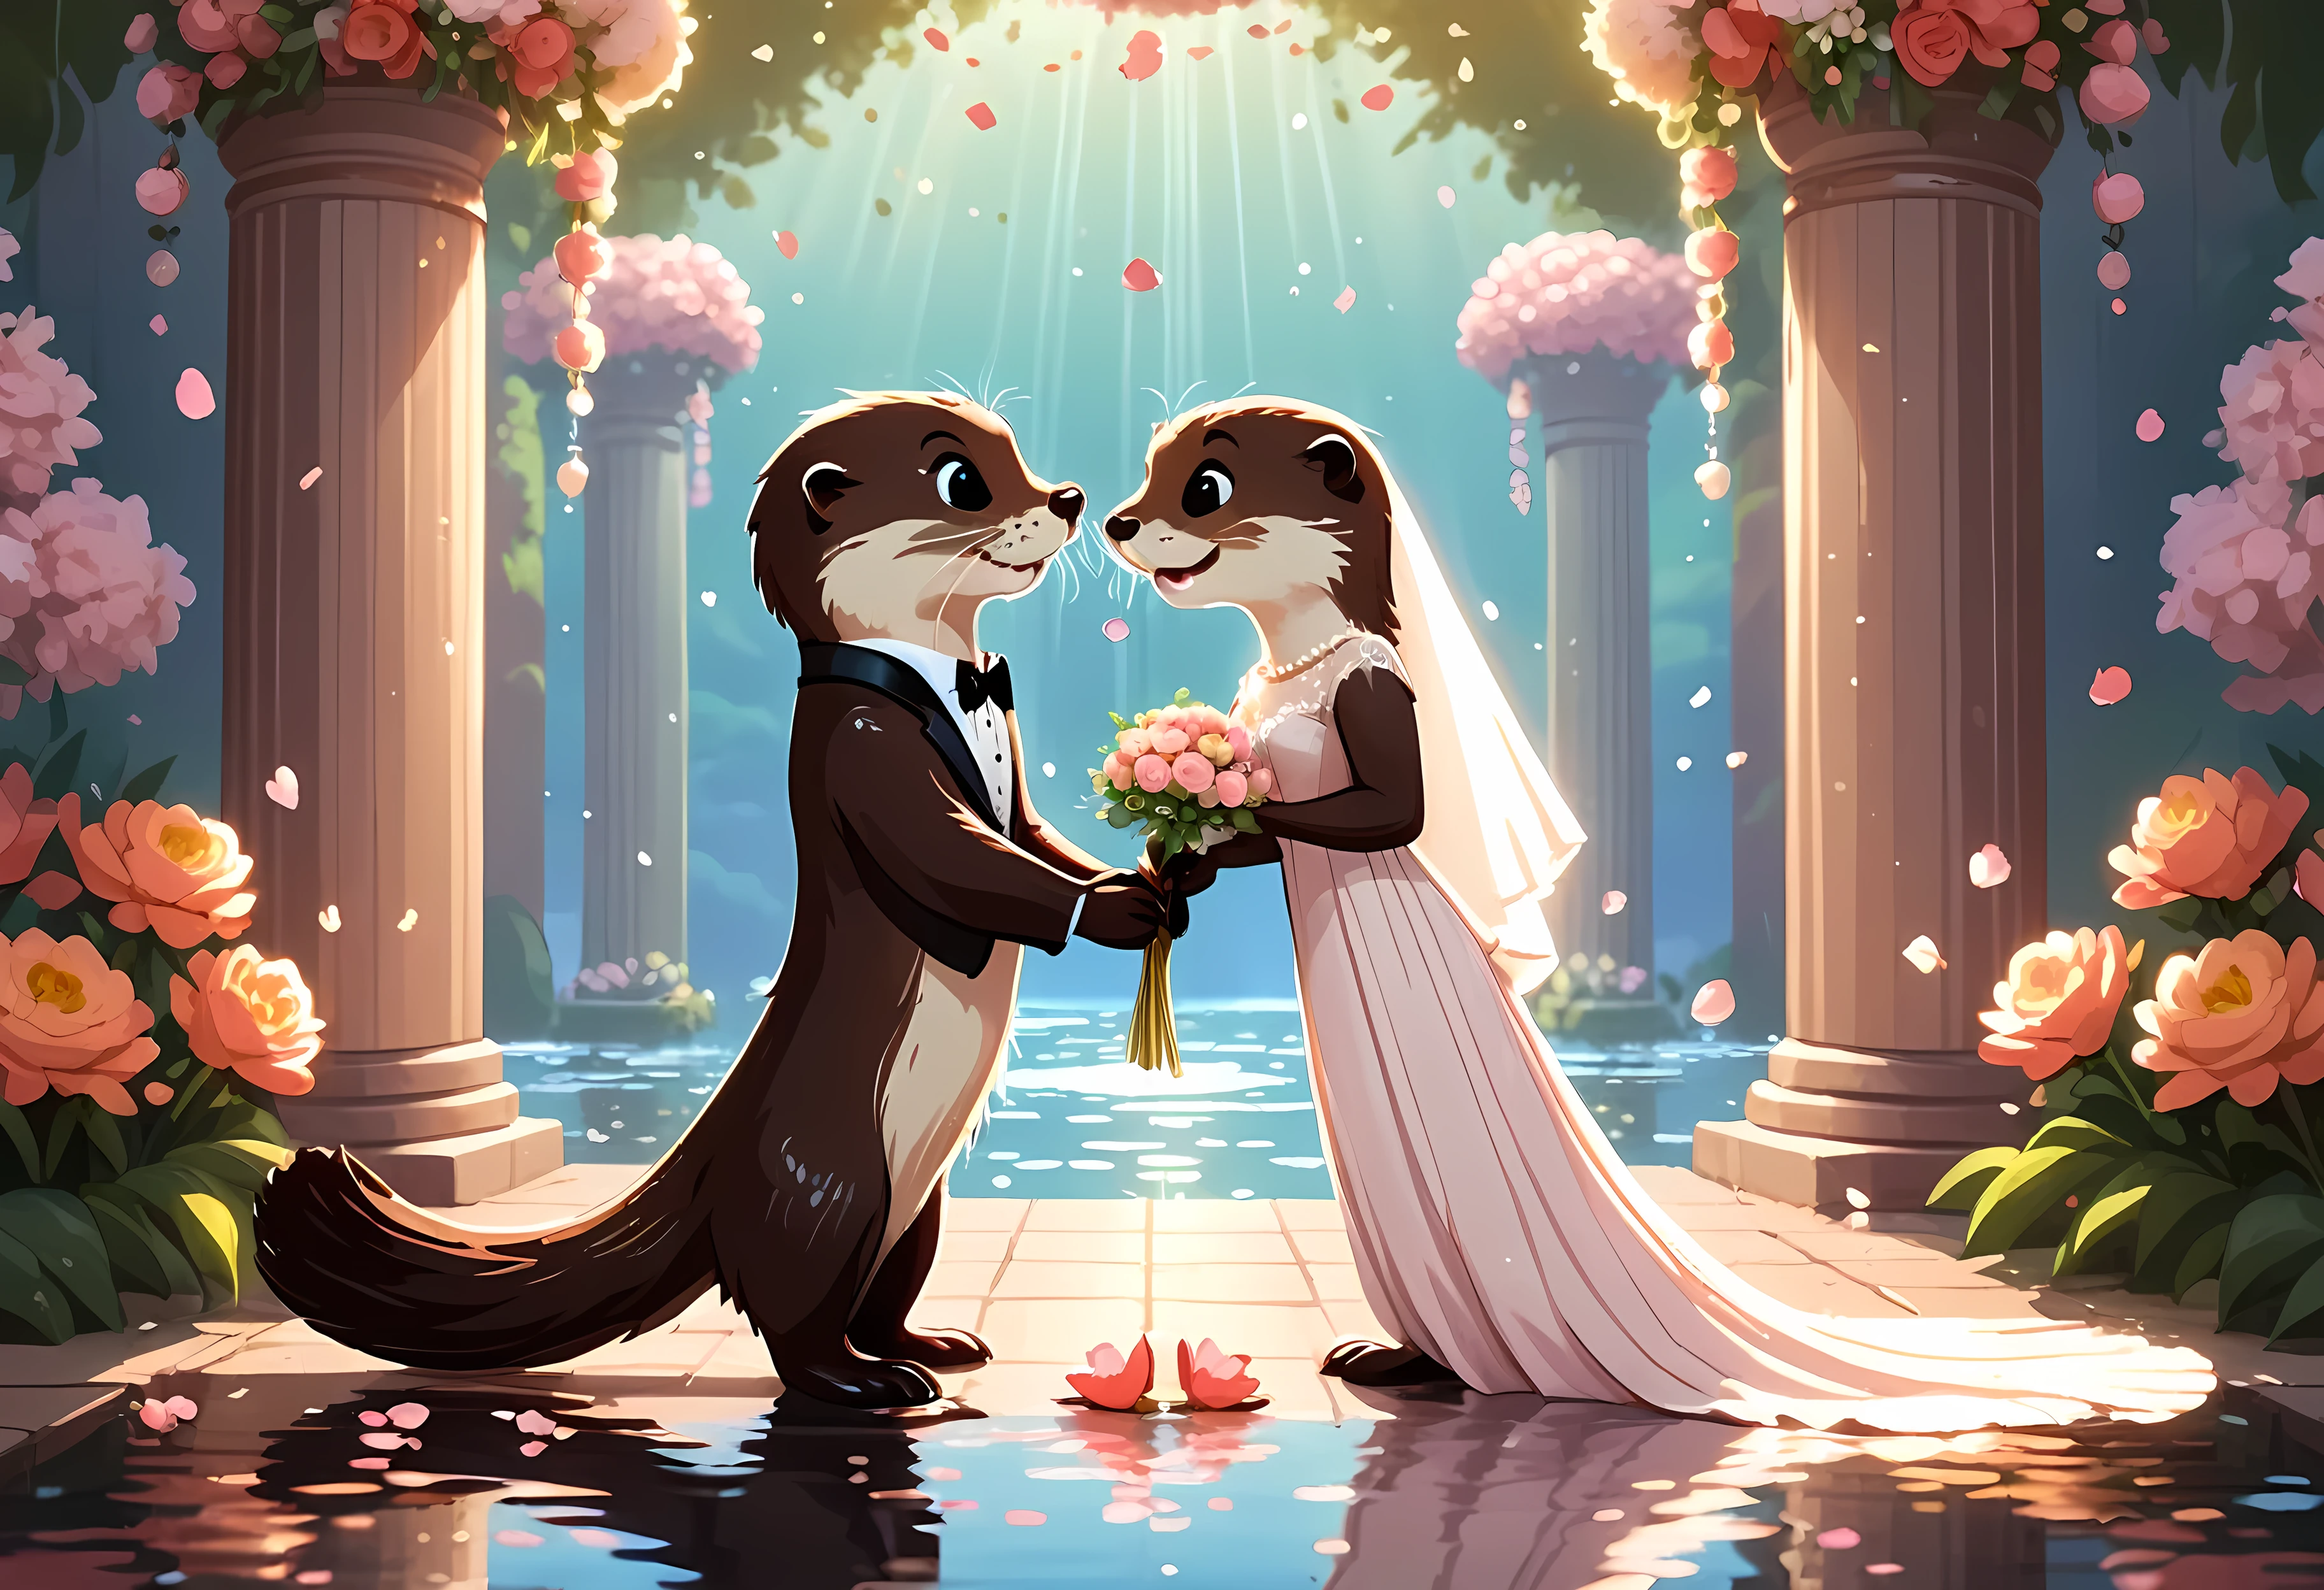 CuteCartoonAF, Cute Cartoon, cute cartoon illustration, (masterpiece in maximum 16K resolution, superb quality, ultra detailed:1.3), side view of a hamster love couple standing on the (decorative romantic boat amidst the classic wedding ceremony), (ruffled stylish clothes:1.2), (columns surrounded with flowers, floating petals), divine aura, serene romantic atmosphere.
